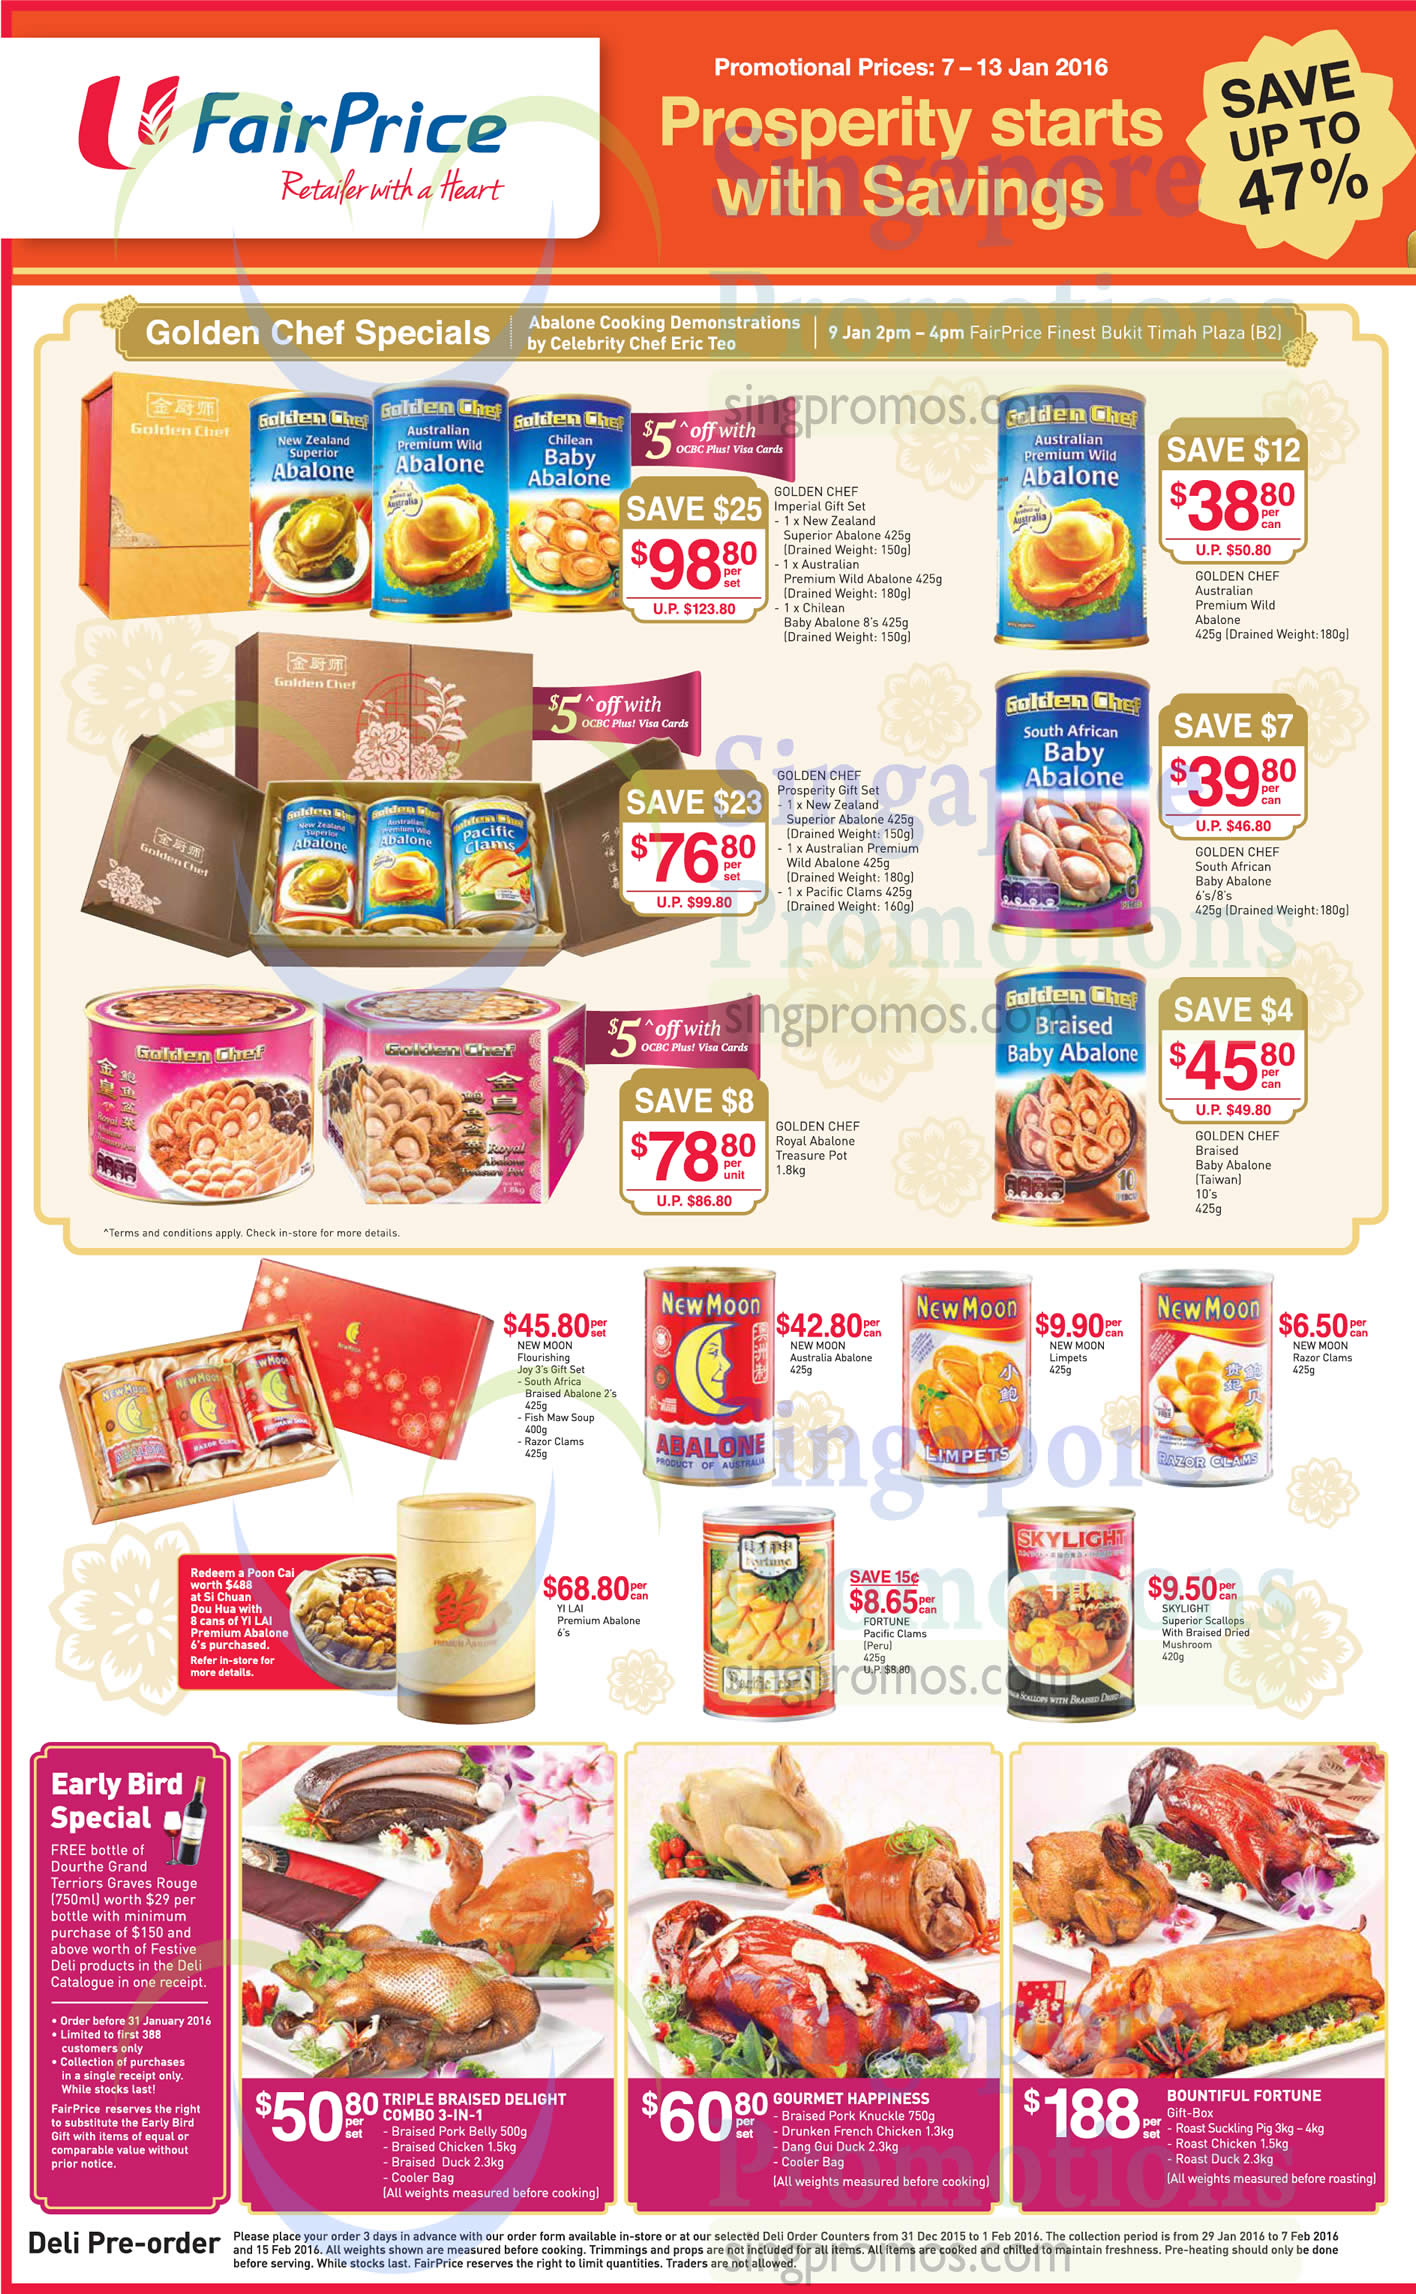 Featured image for Fairprice Abalones (New Moon, Golden Chef, Skylight), CNY Goodies & More Offers 7 - 13 Jan 2016